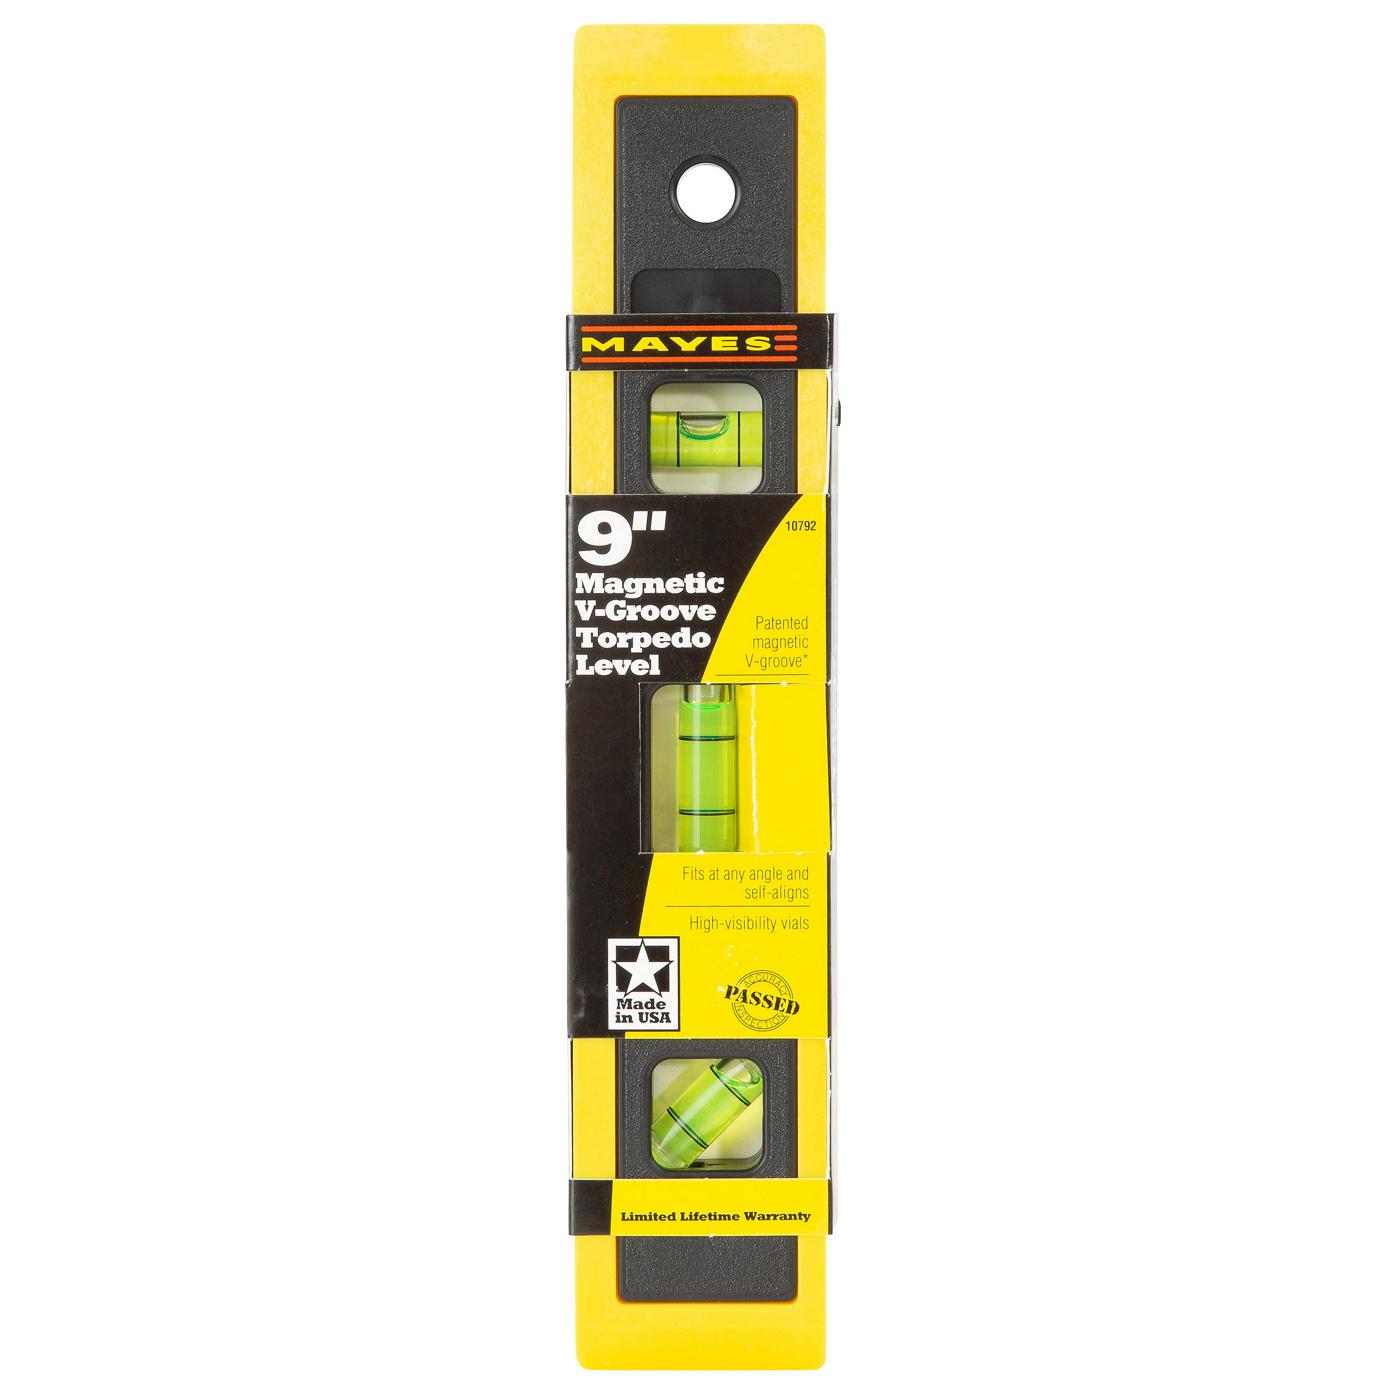 Mayes Professional Torpedo Level with Magnetic V-Groove Edge; image 1 of 7